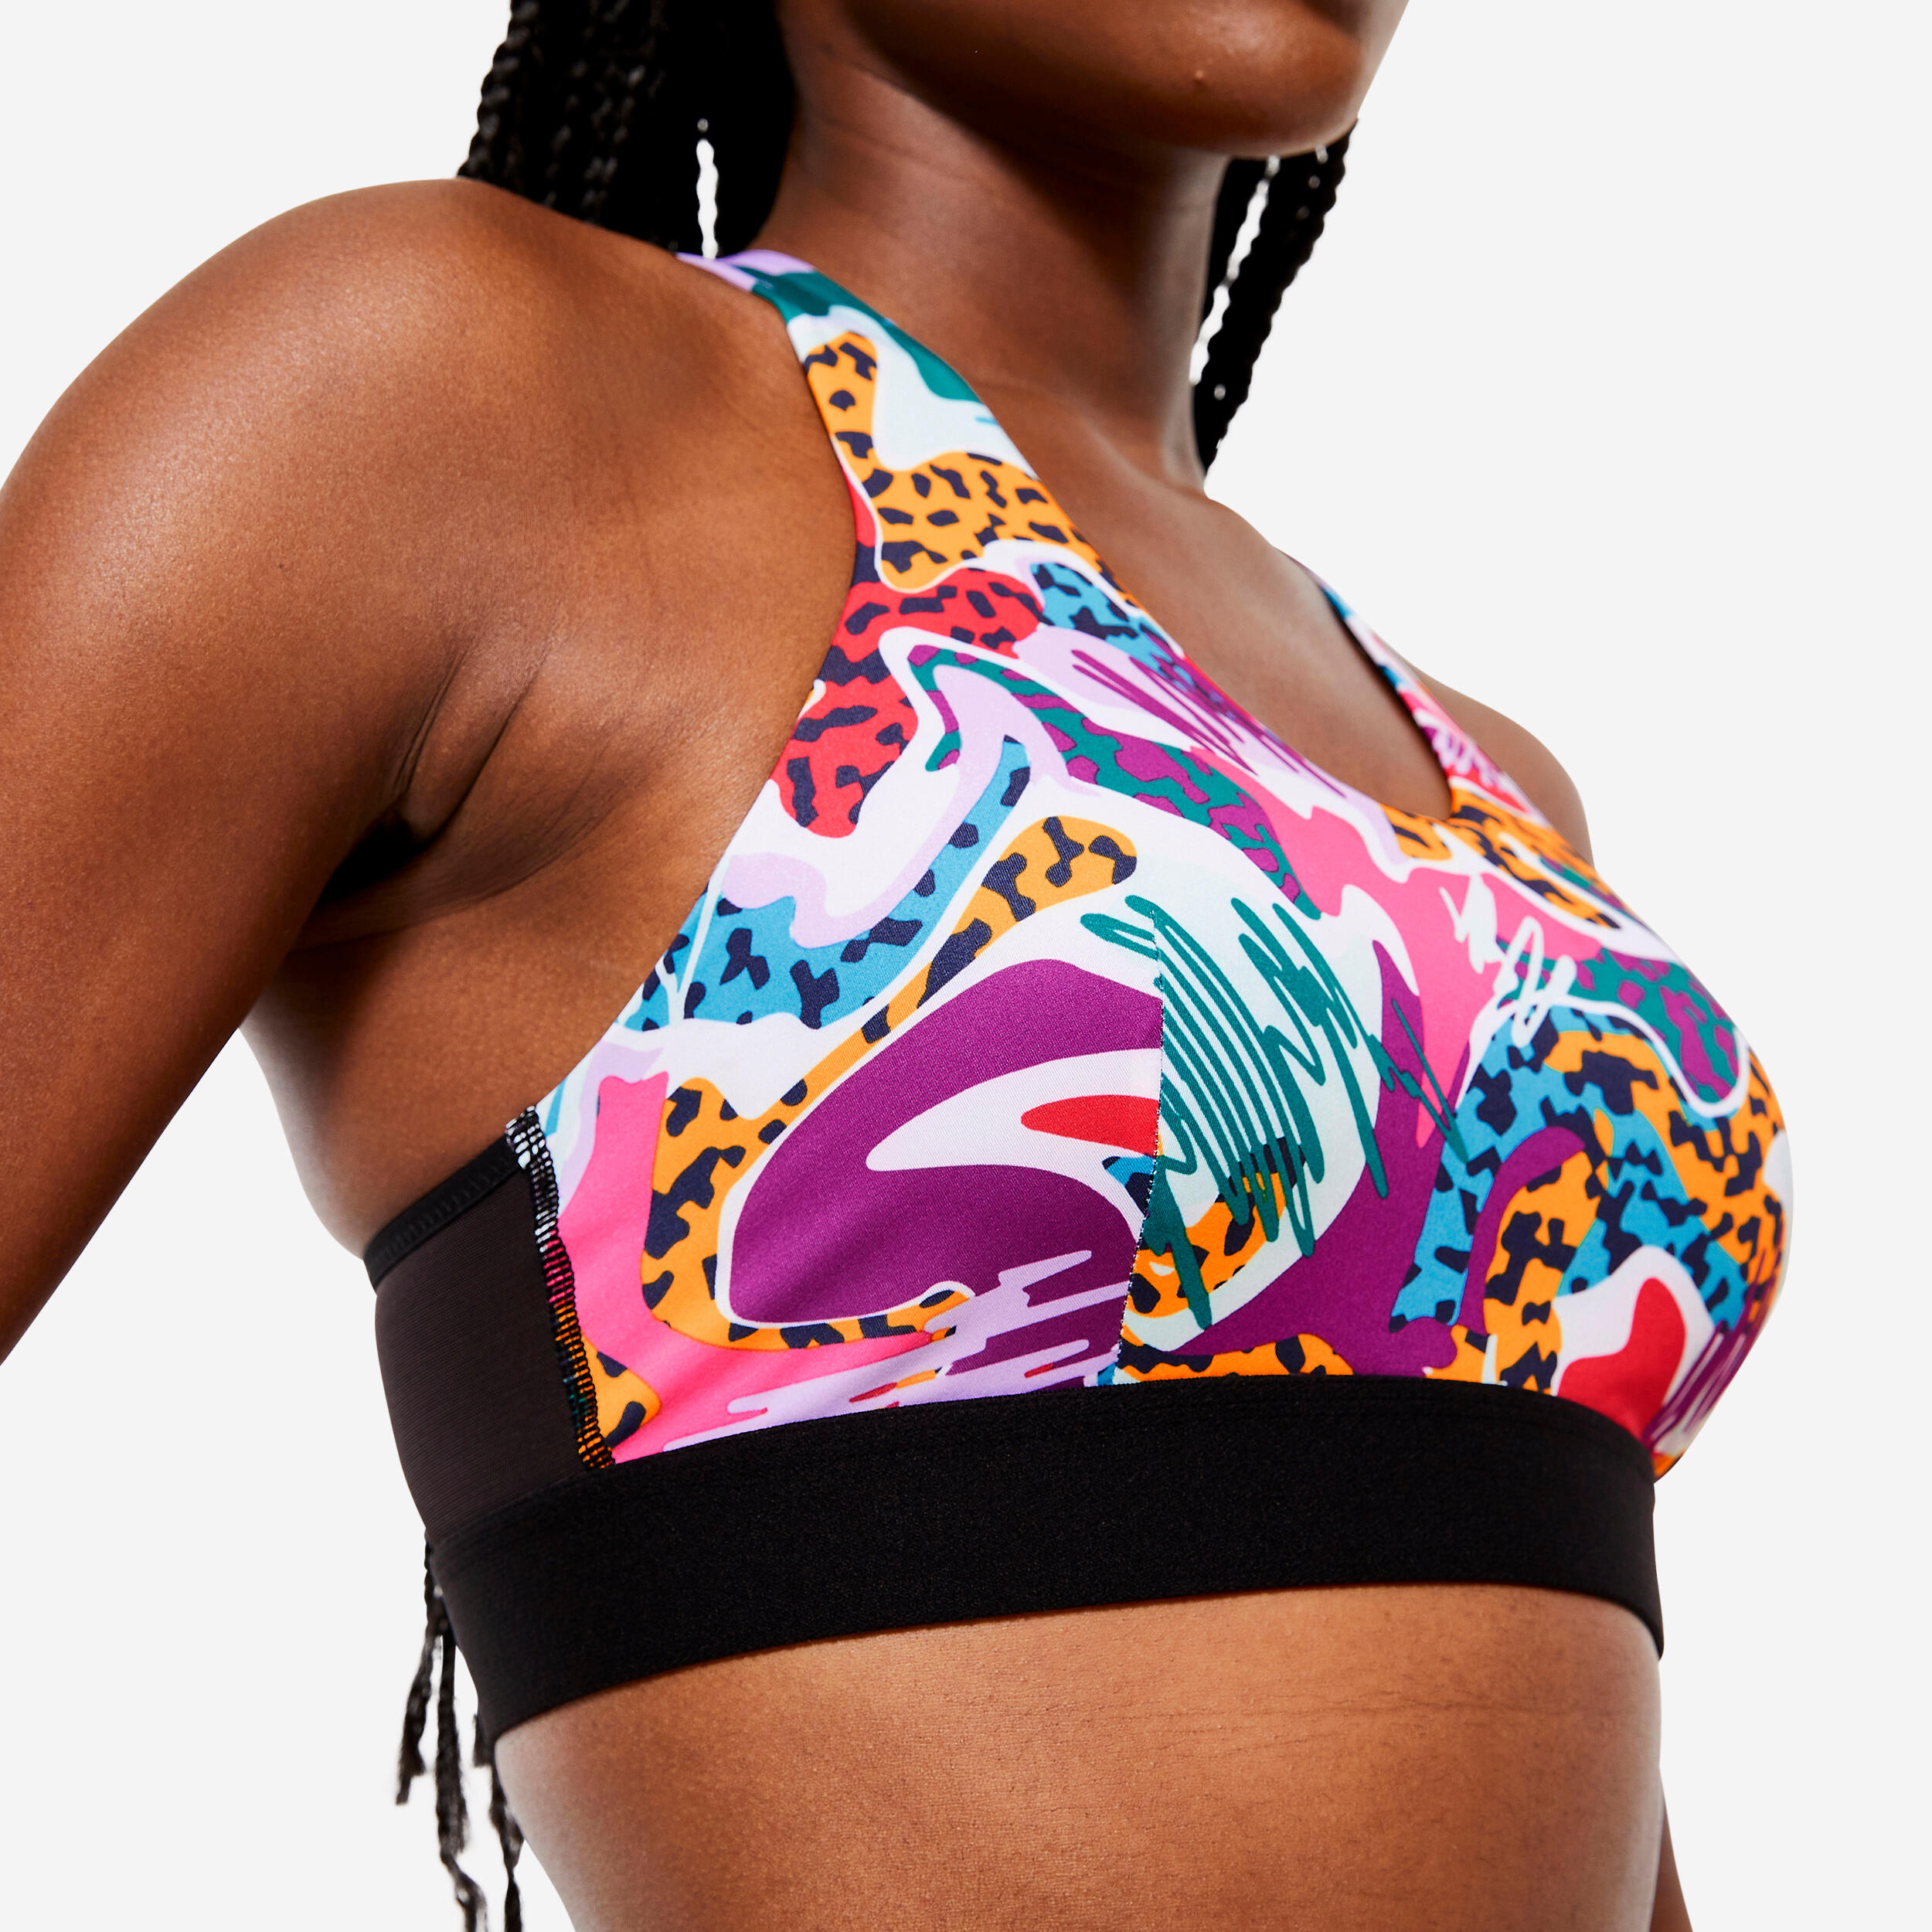 Women's Medium Support Racer Back Sports Bra with Cups - Multicoloured Prints 4/6